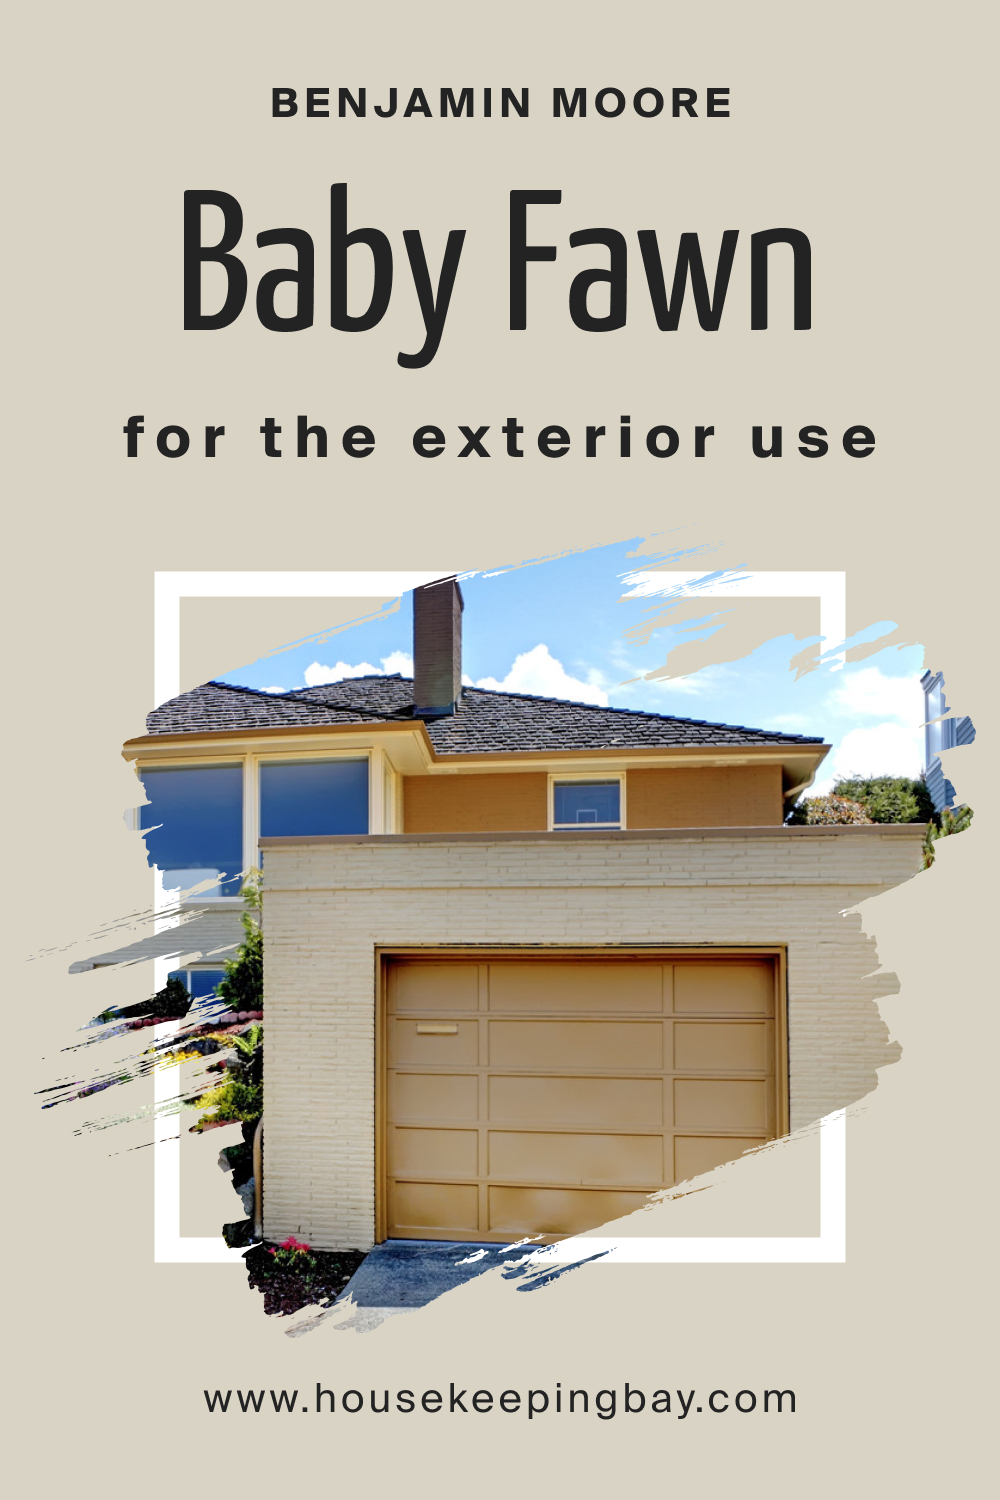 Benjamin Moore. Baby Fawn OC 15 for the Exterior Use